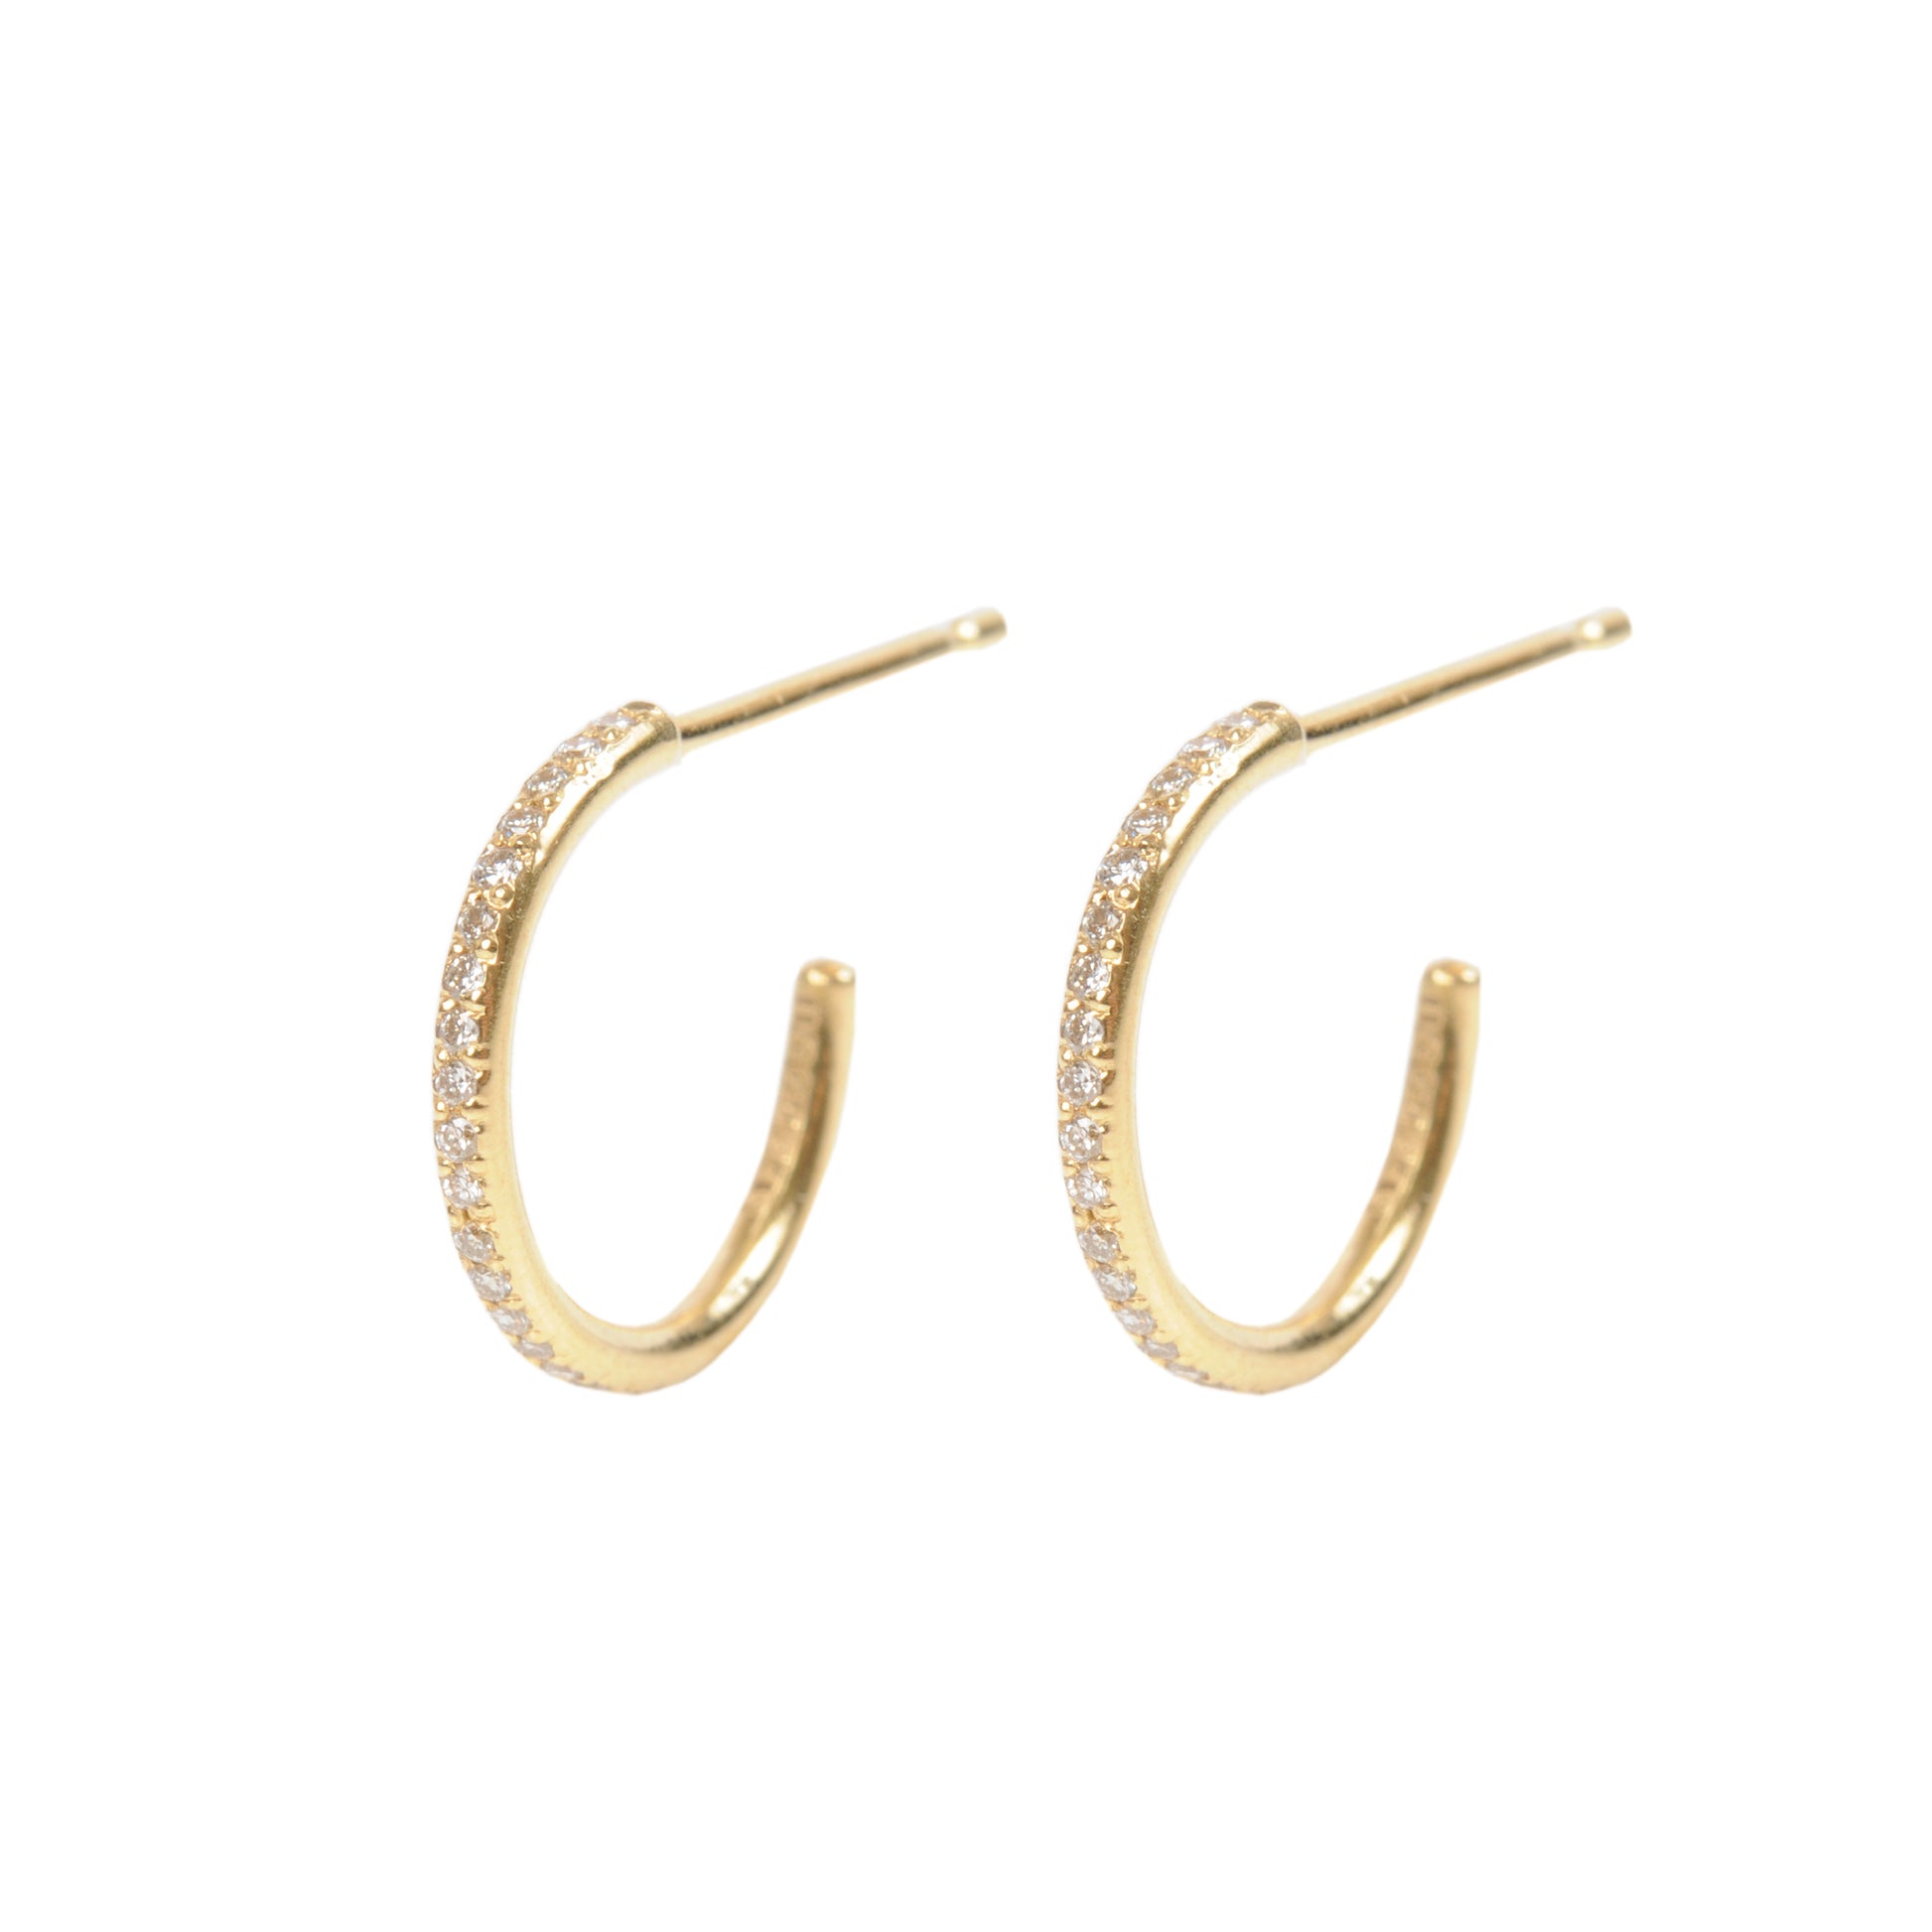 18ct yellow gold hoop earrings pave set with a line of Diamonds